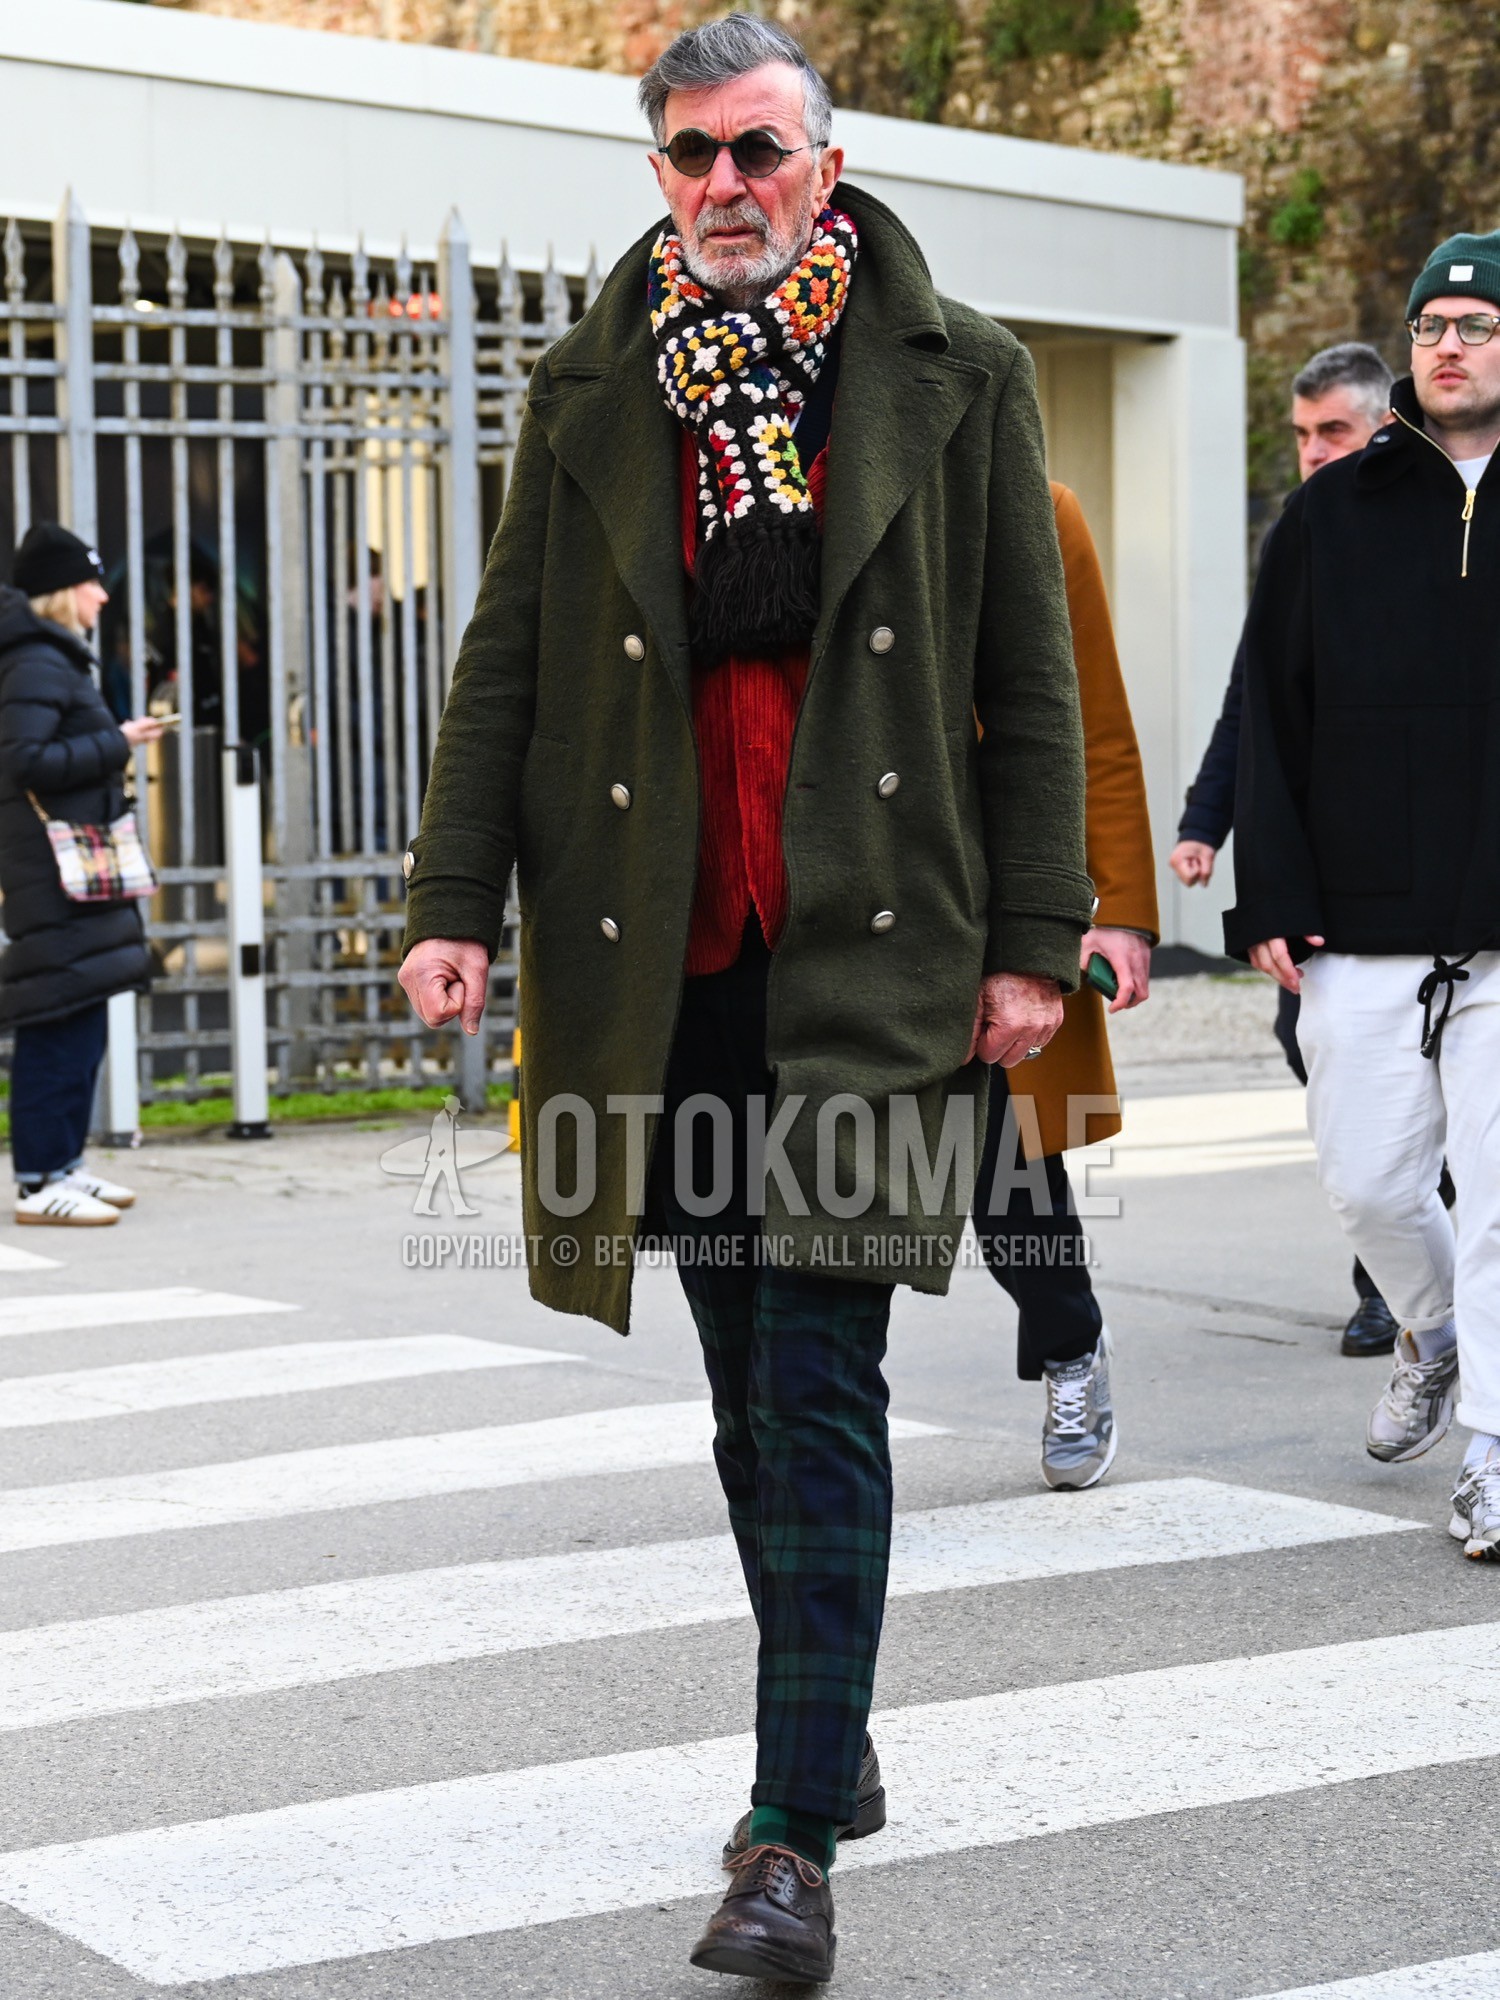 Men's autumn winter outfit with black plain sunglasses, black scarf scarf, olive green plain ulster coat, red stripes tailored jacket, green check cotton pants, green check socks, brown brogue shoes leather shoes.